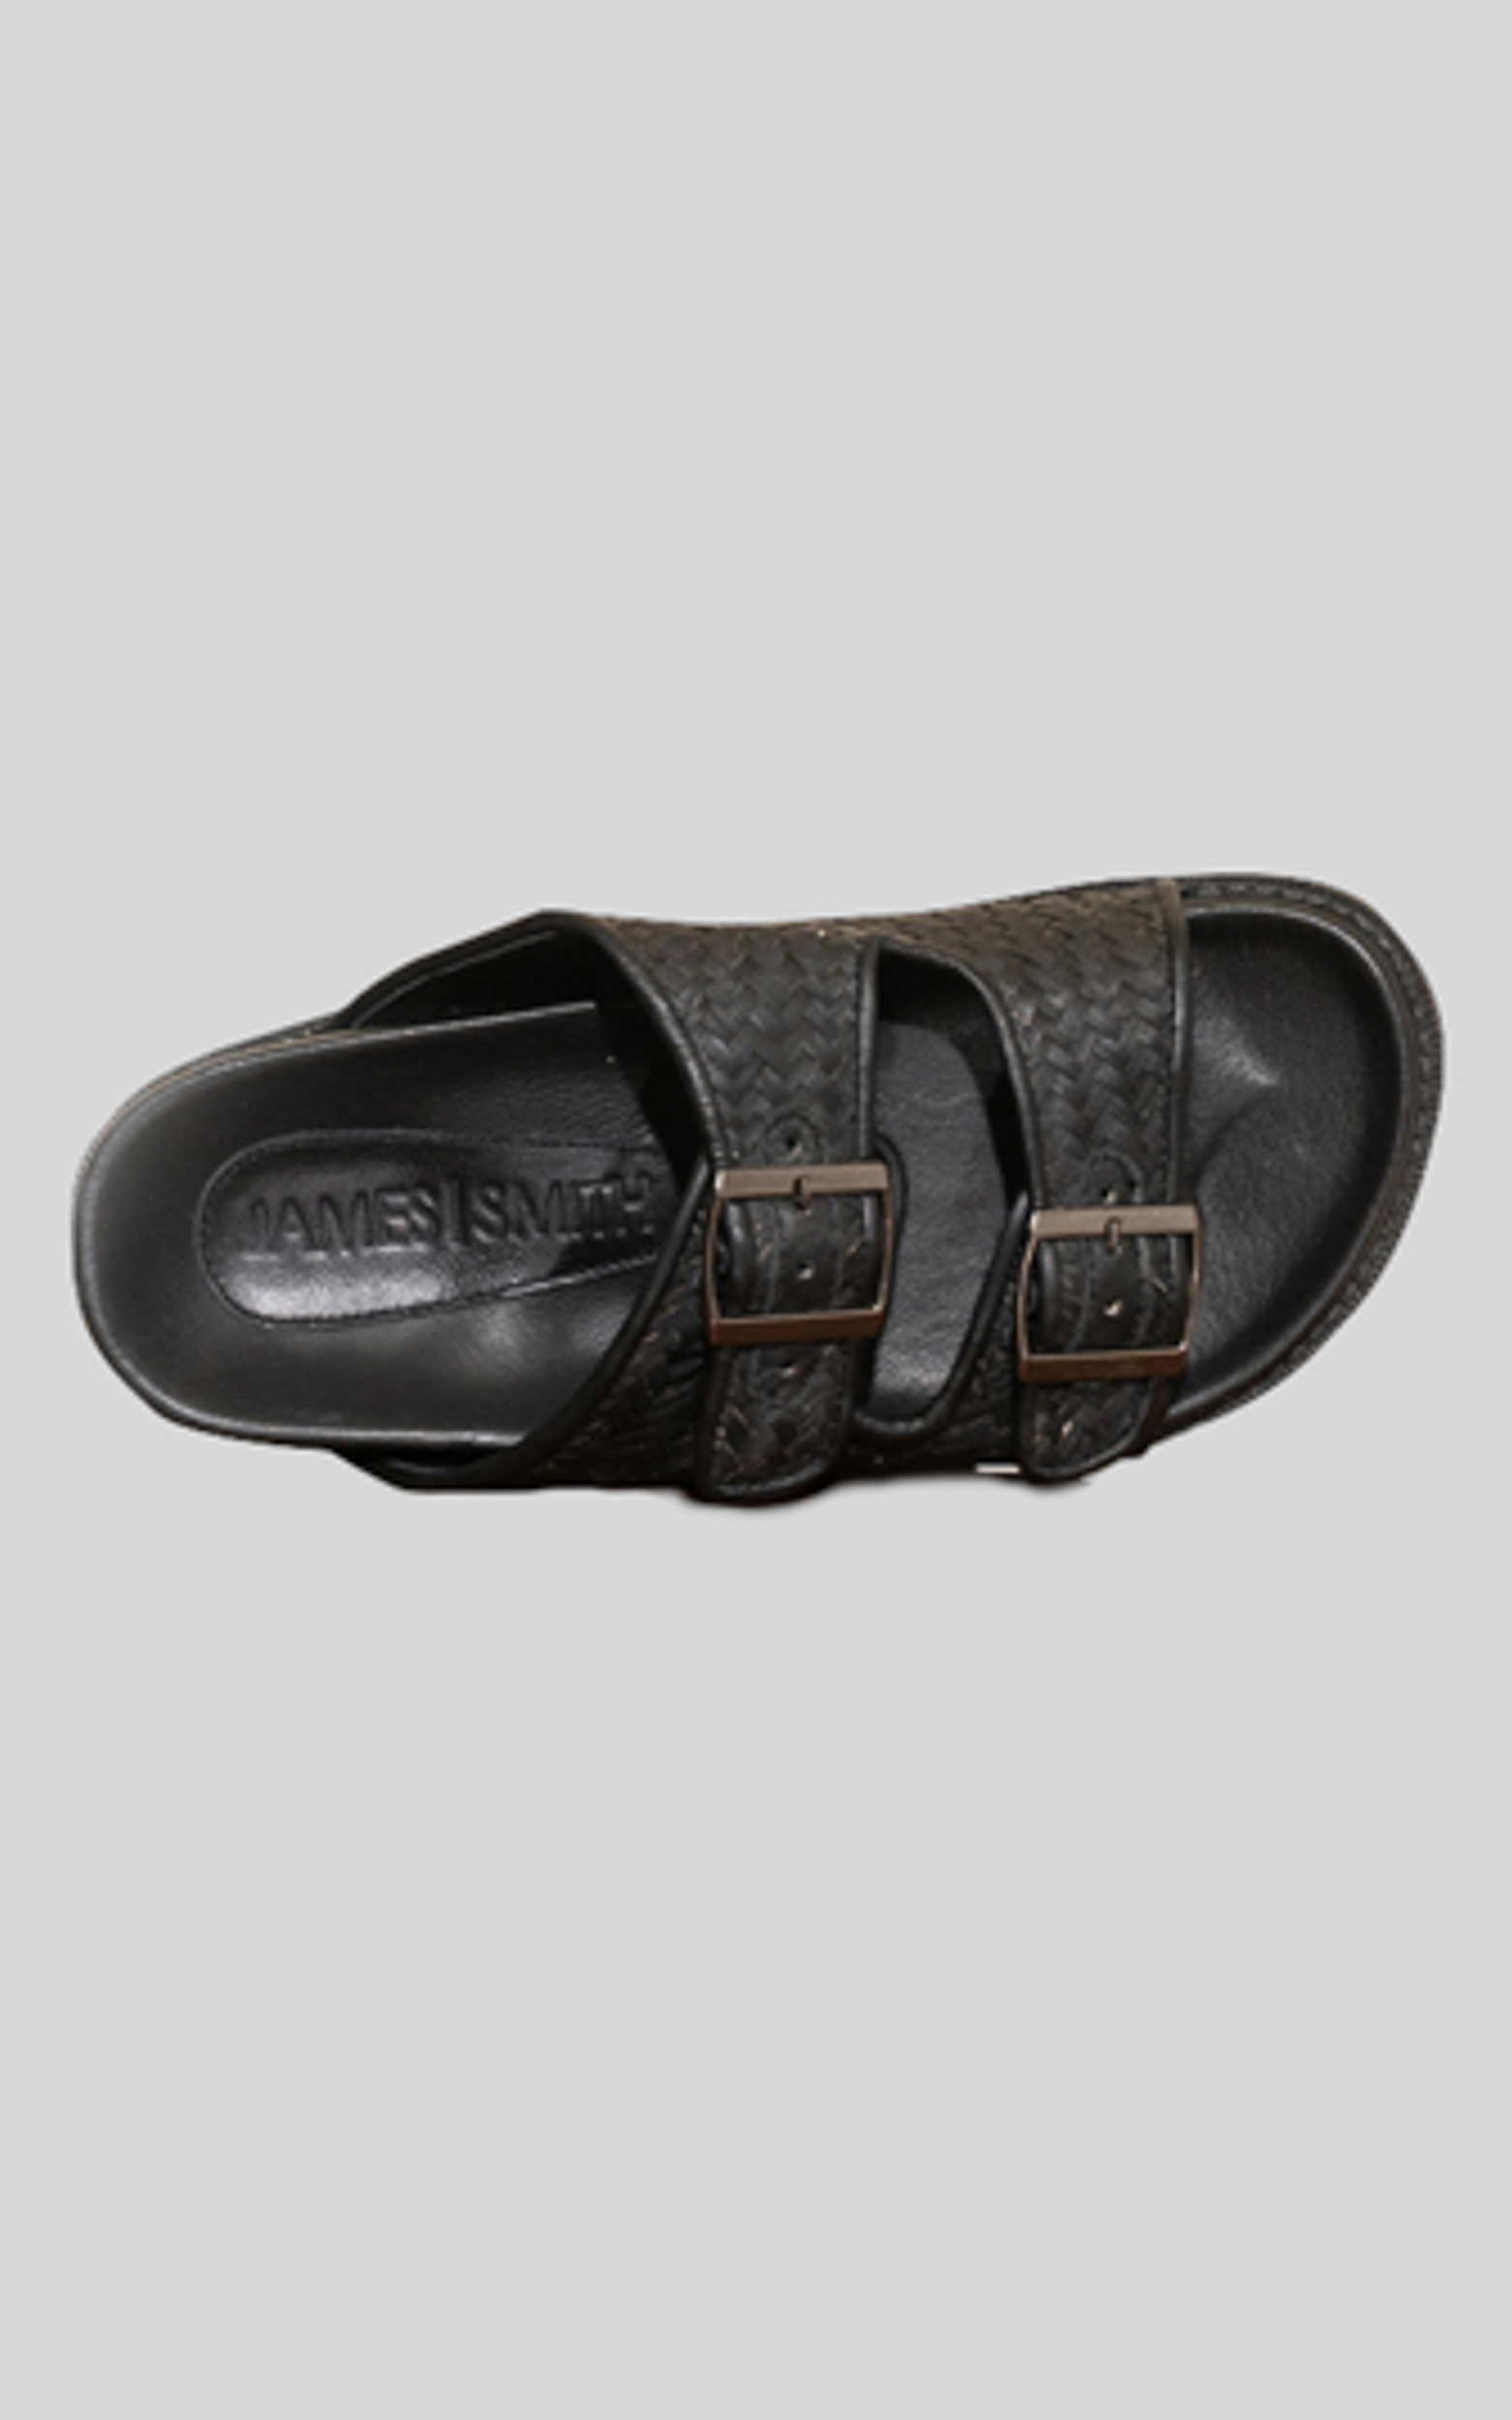 James Smith - Sardinia Slide in Black Woven - 05, BLK1, hi-res image number null